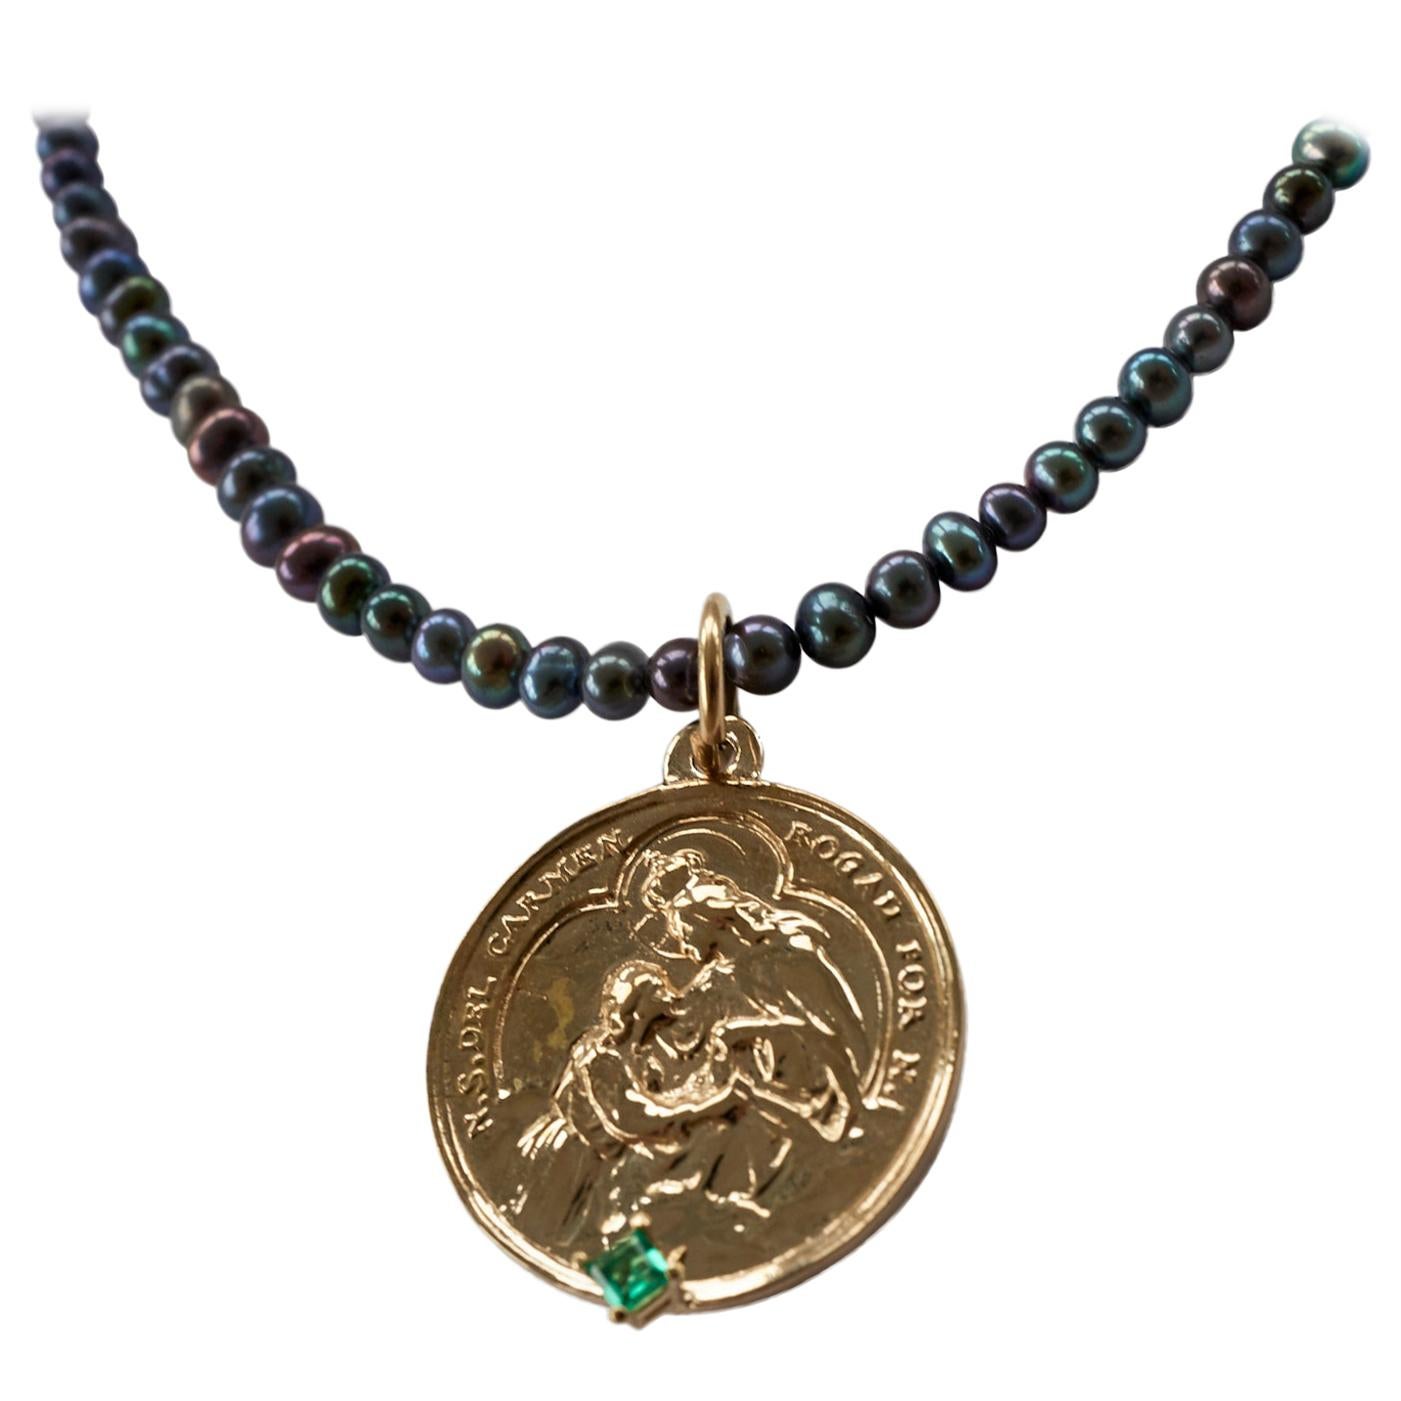 Emerald Black Pearl Virgin Mother Mary Medal Chunky Chain Necklace J Dauphin

Exclusive piece with Virgin Mary Medal Round Coin pendant in Bronze with a square Emerald  set in Gold prong and a gold filled Chain. Necklace is 22